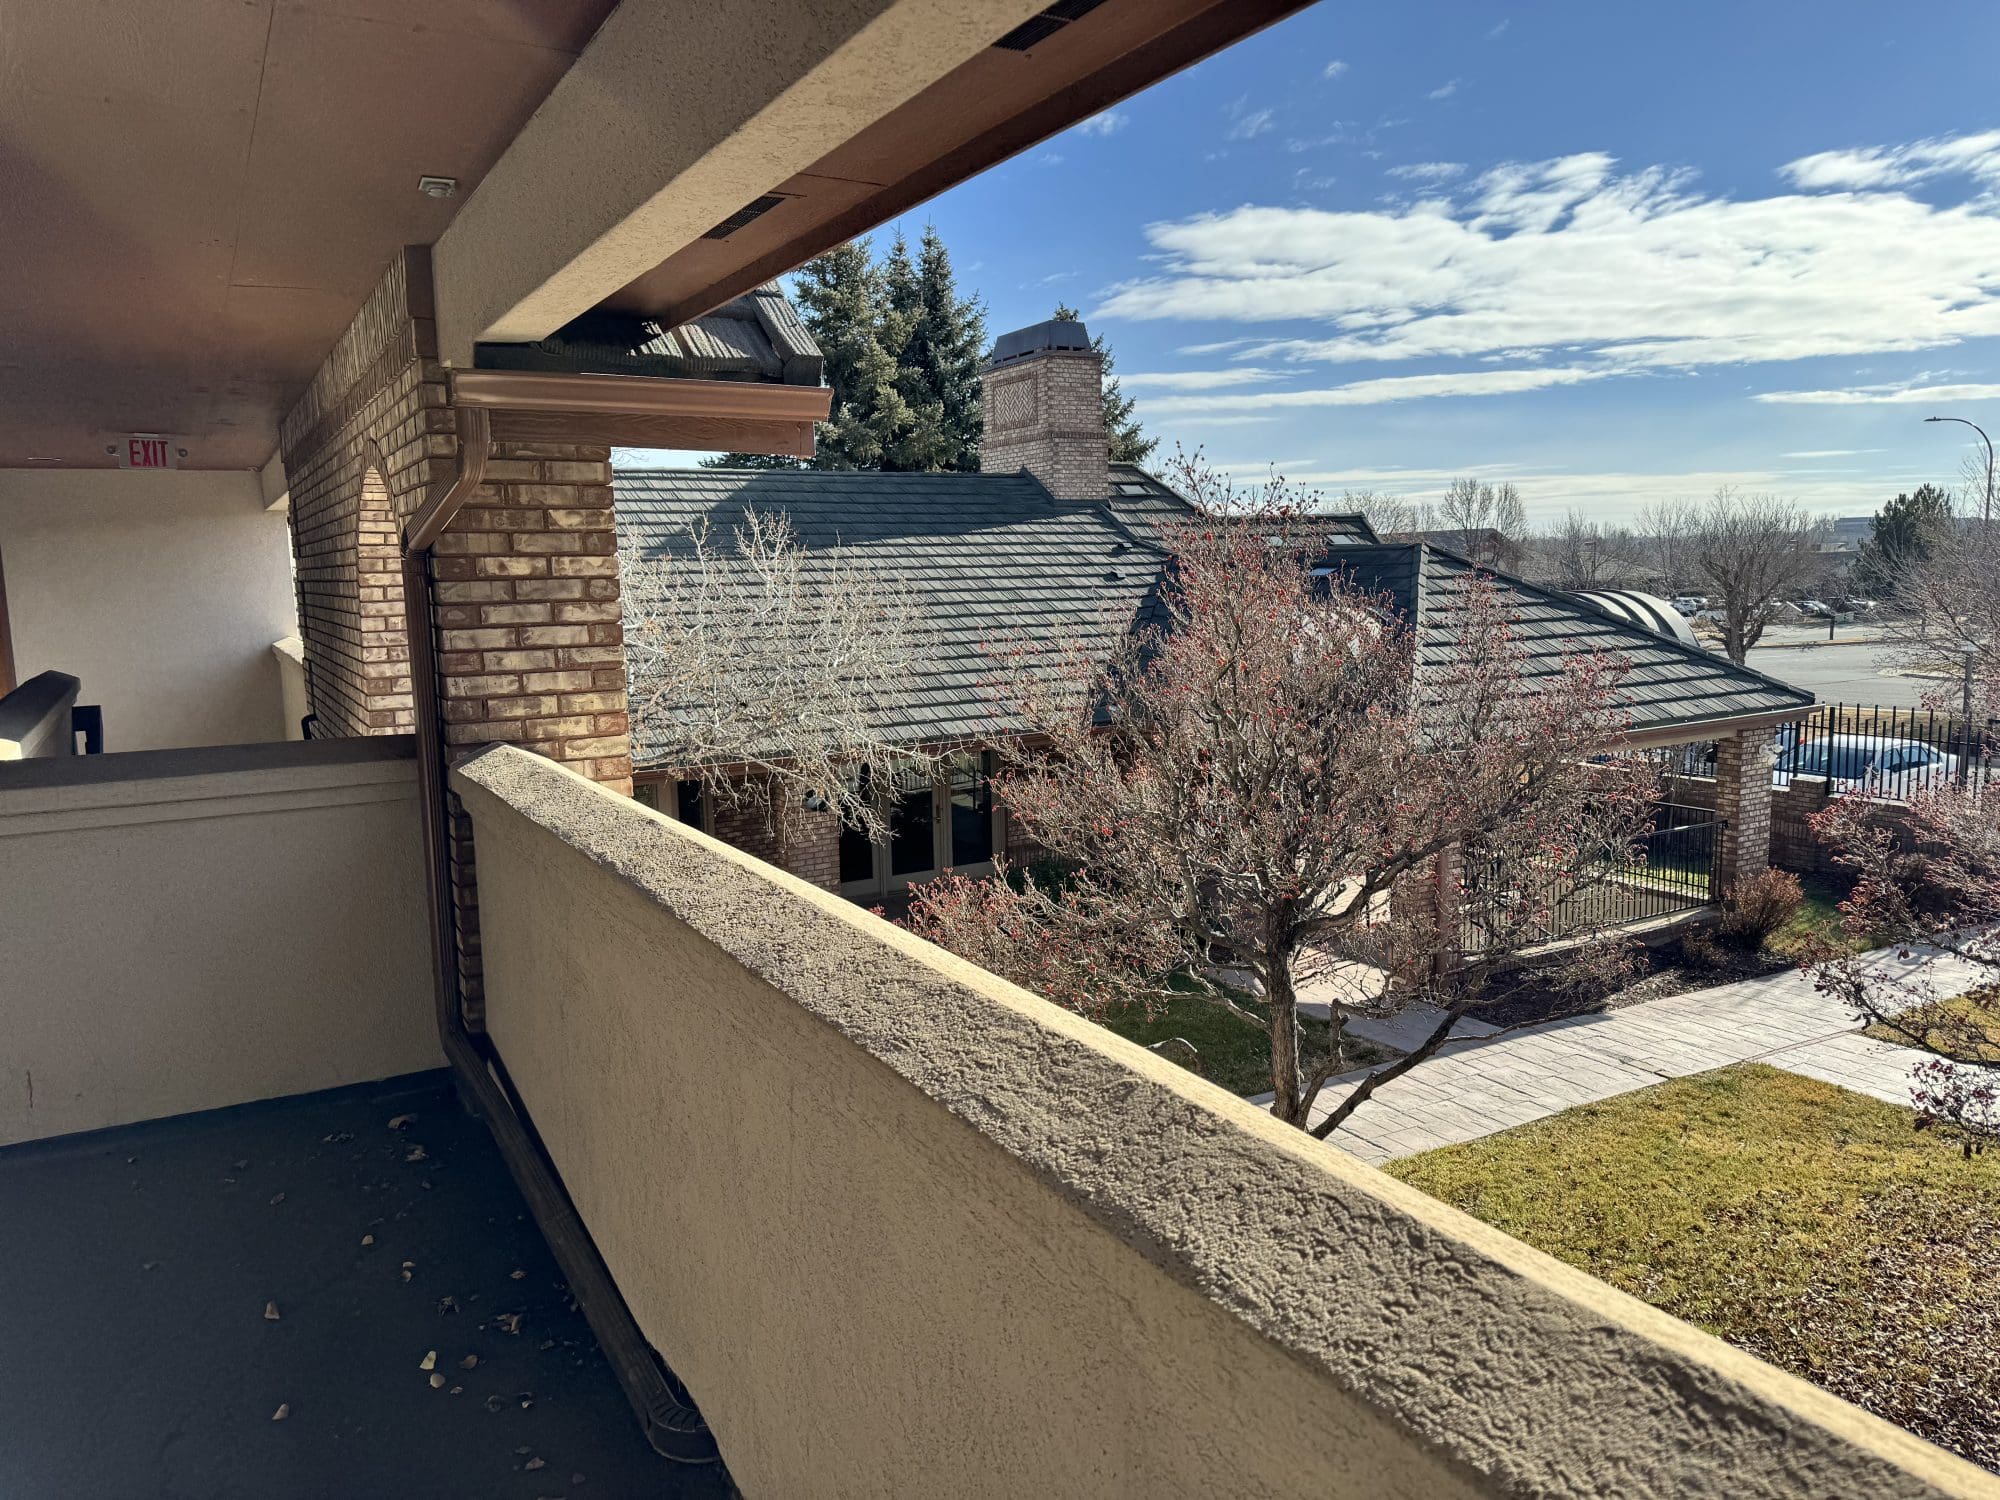 Balcony at residential treatment center in Greeley, Colorado.